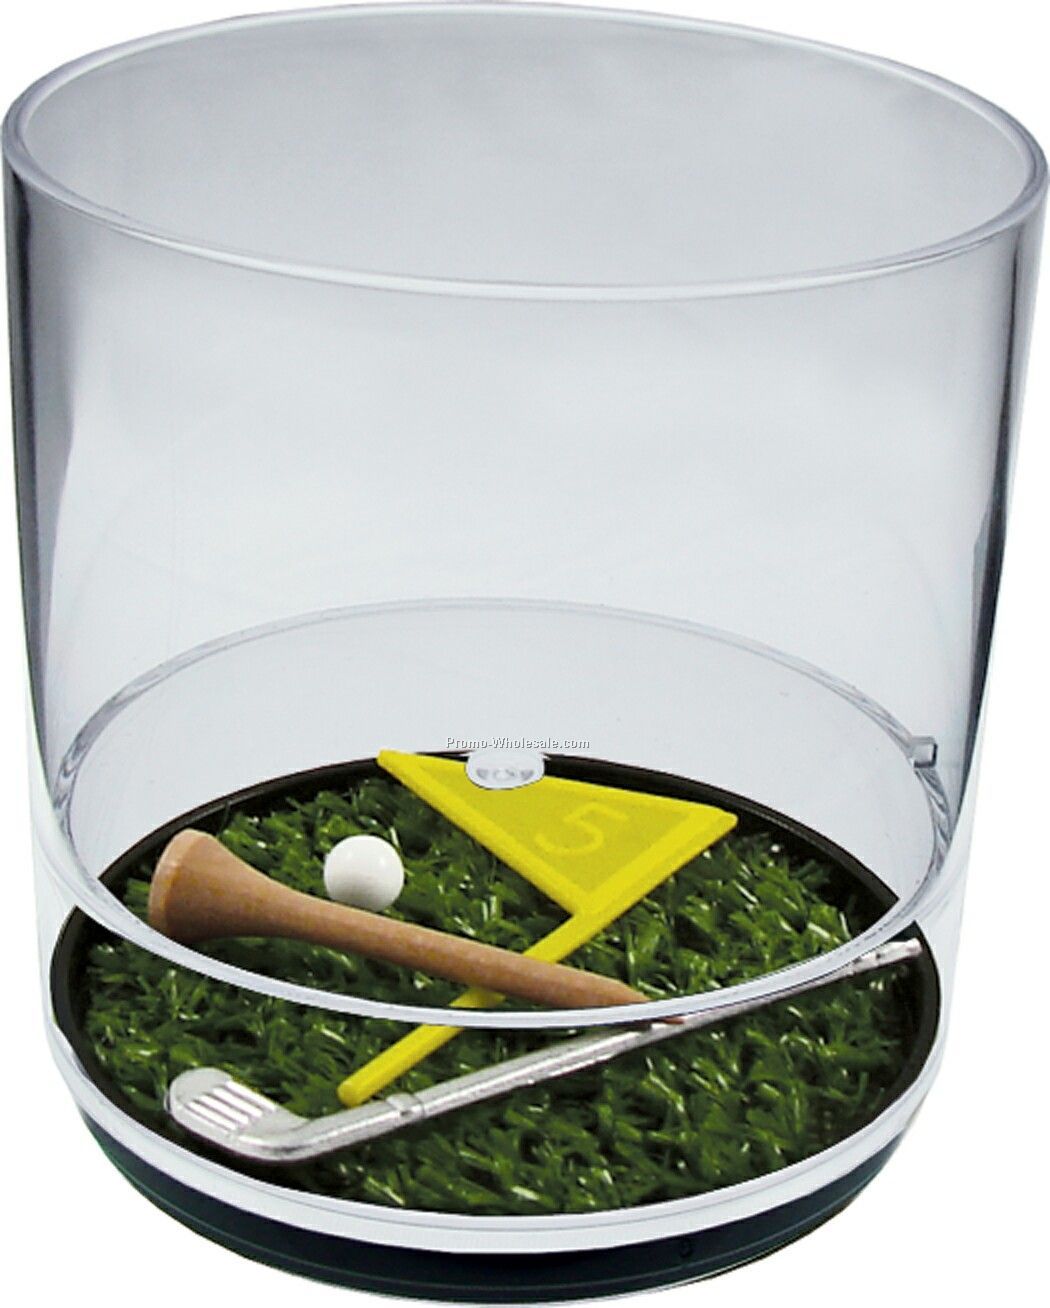 12 Oz. Hole In One Compartment Tumbler Cup